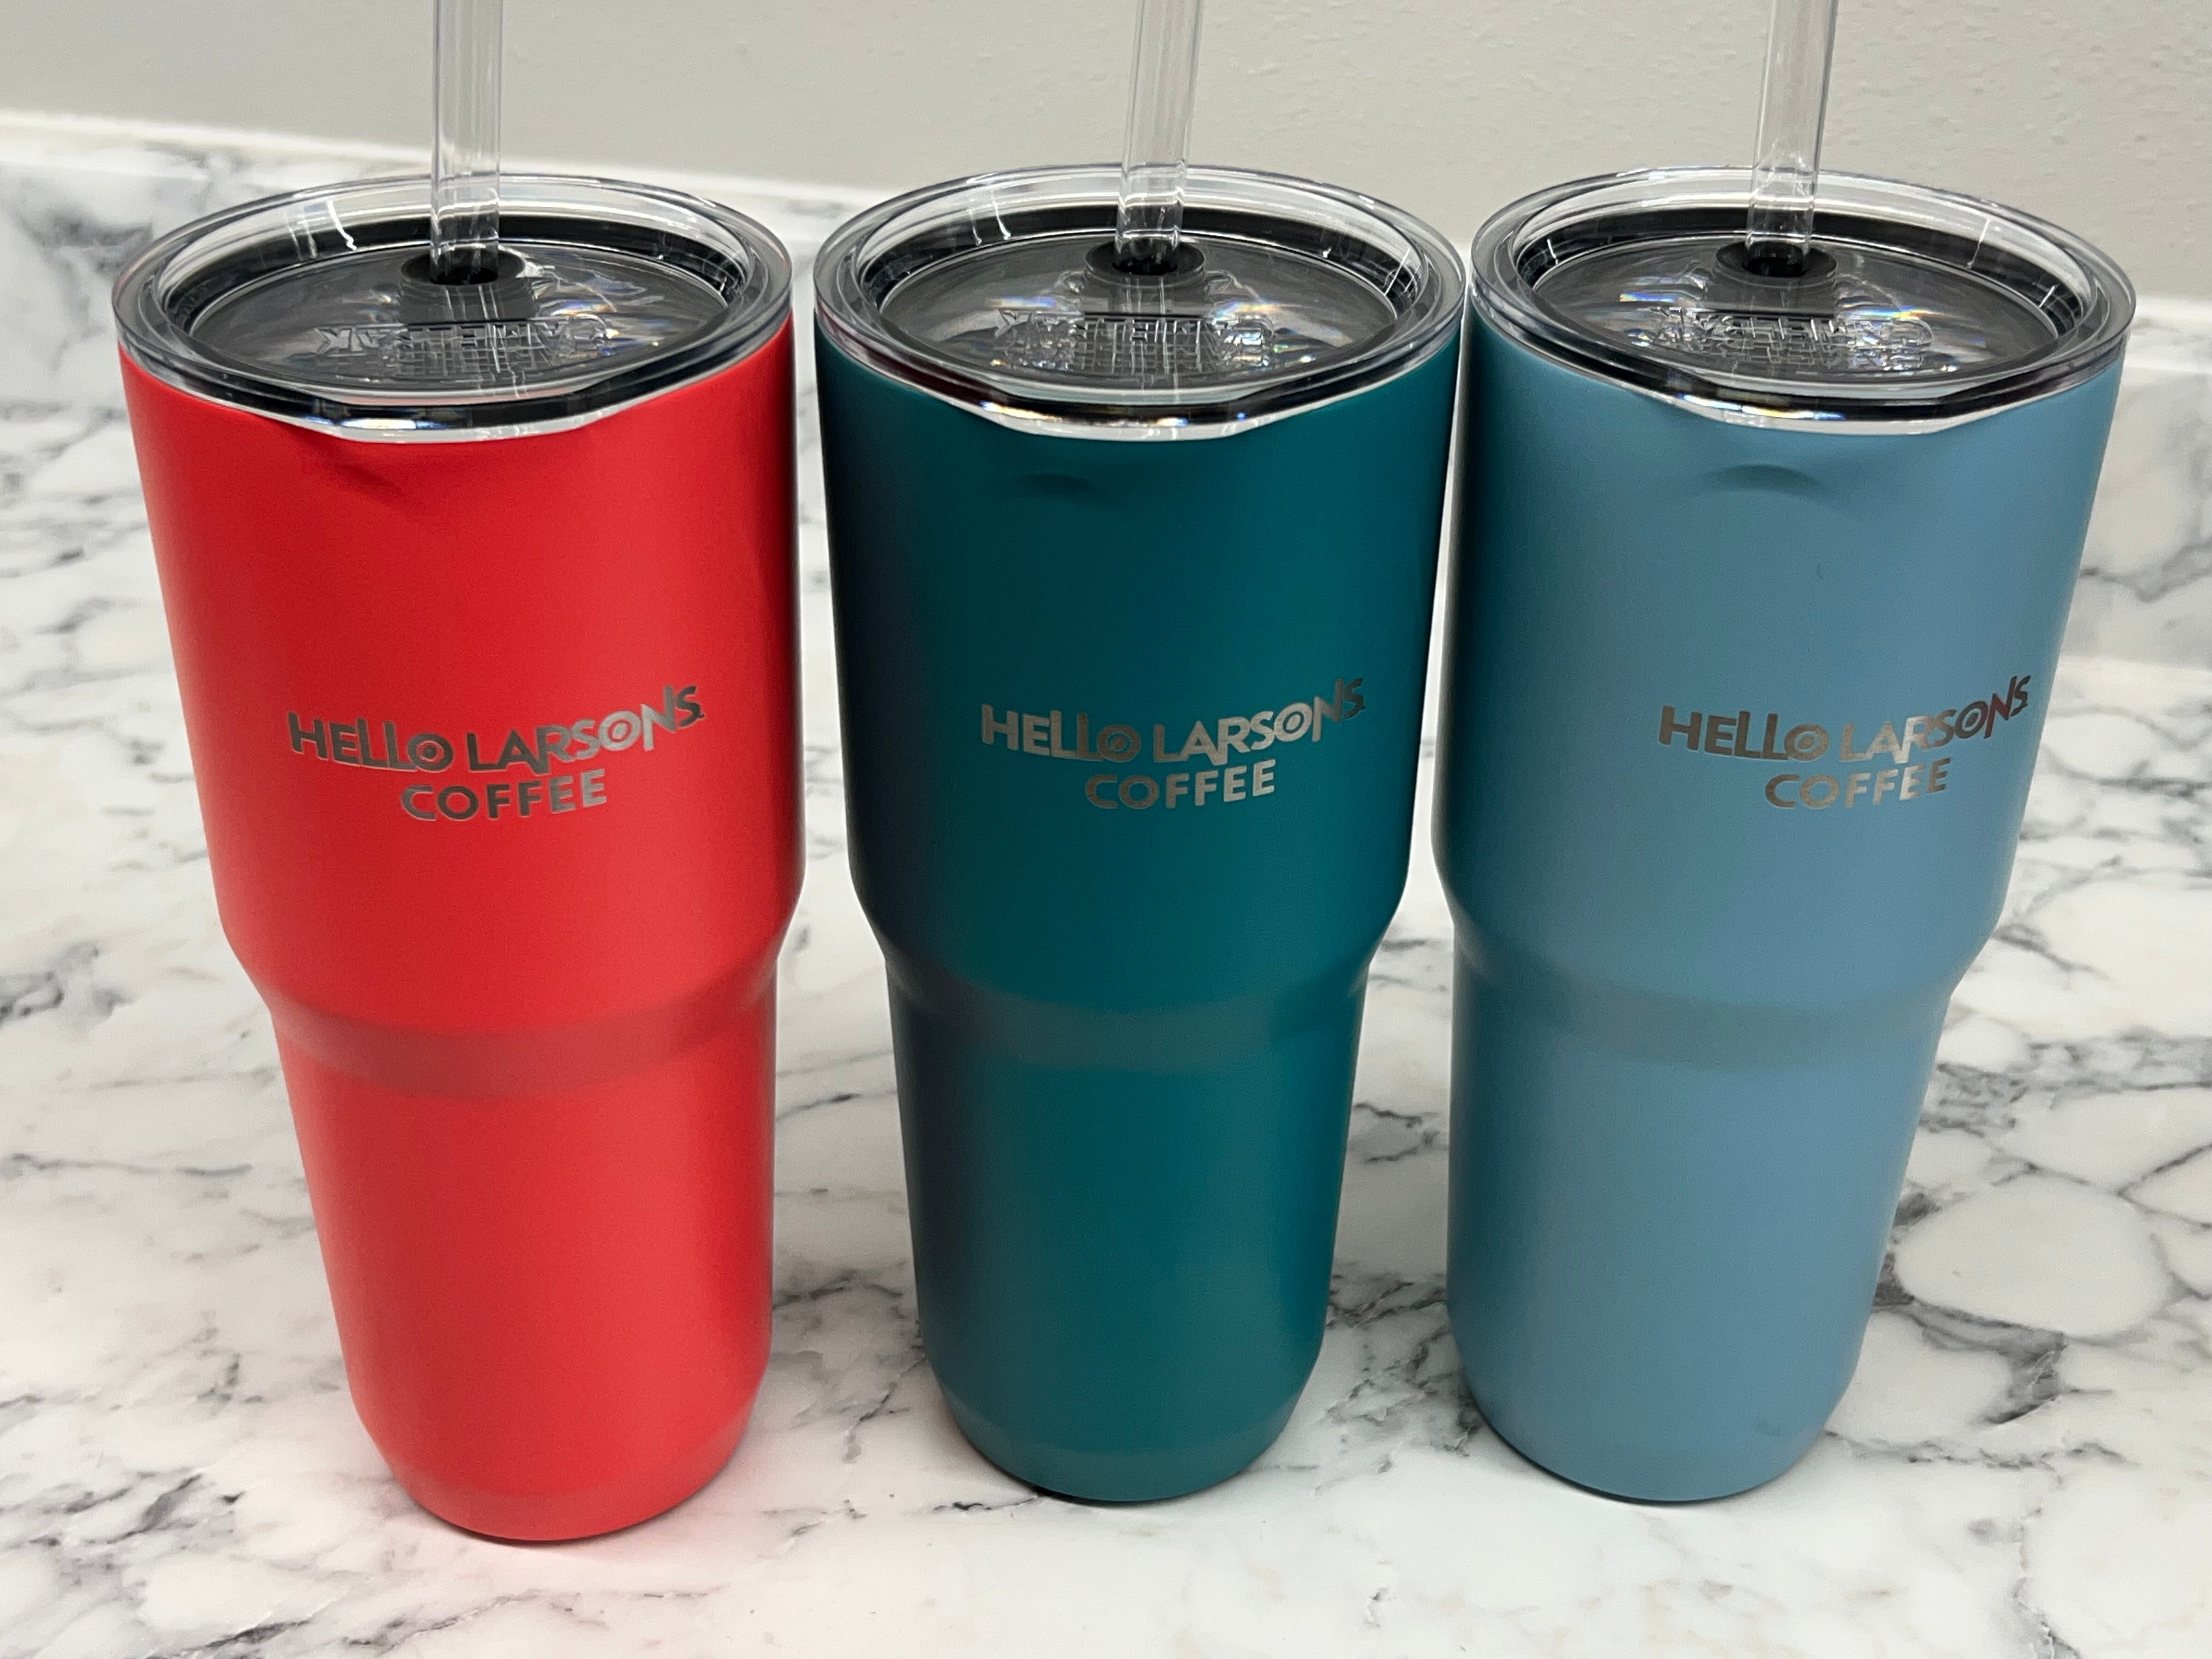 Ello Teal 20oz Stainless steel Tumbler with Lid